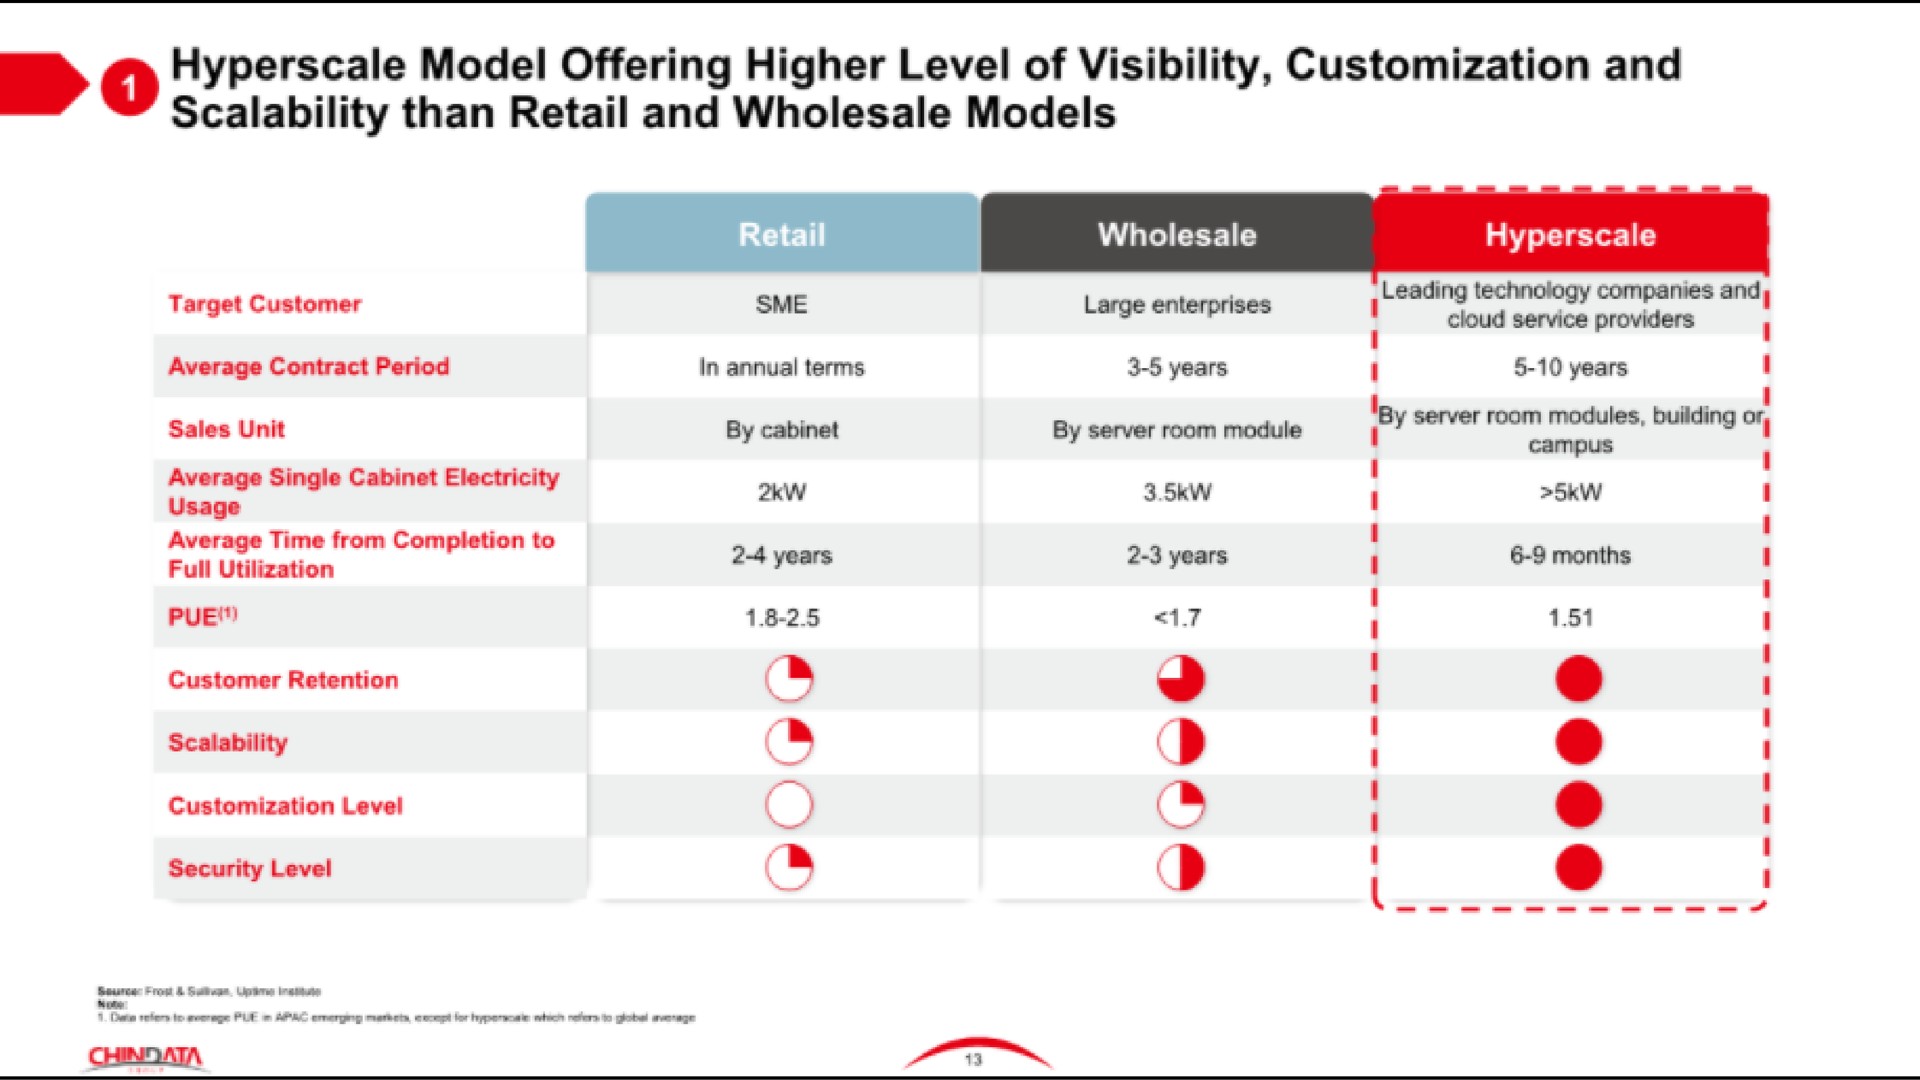 model offering higher level of visibility and than retail and wholesale models | Chindata Group